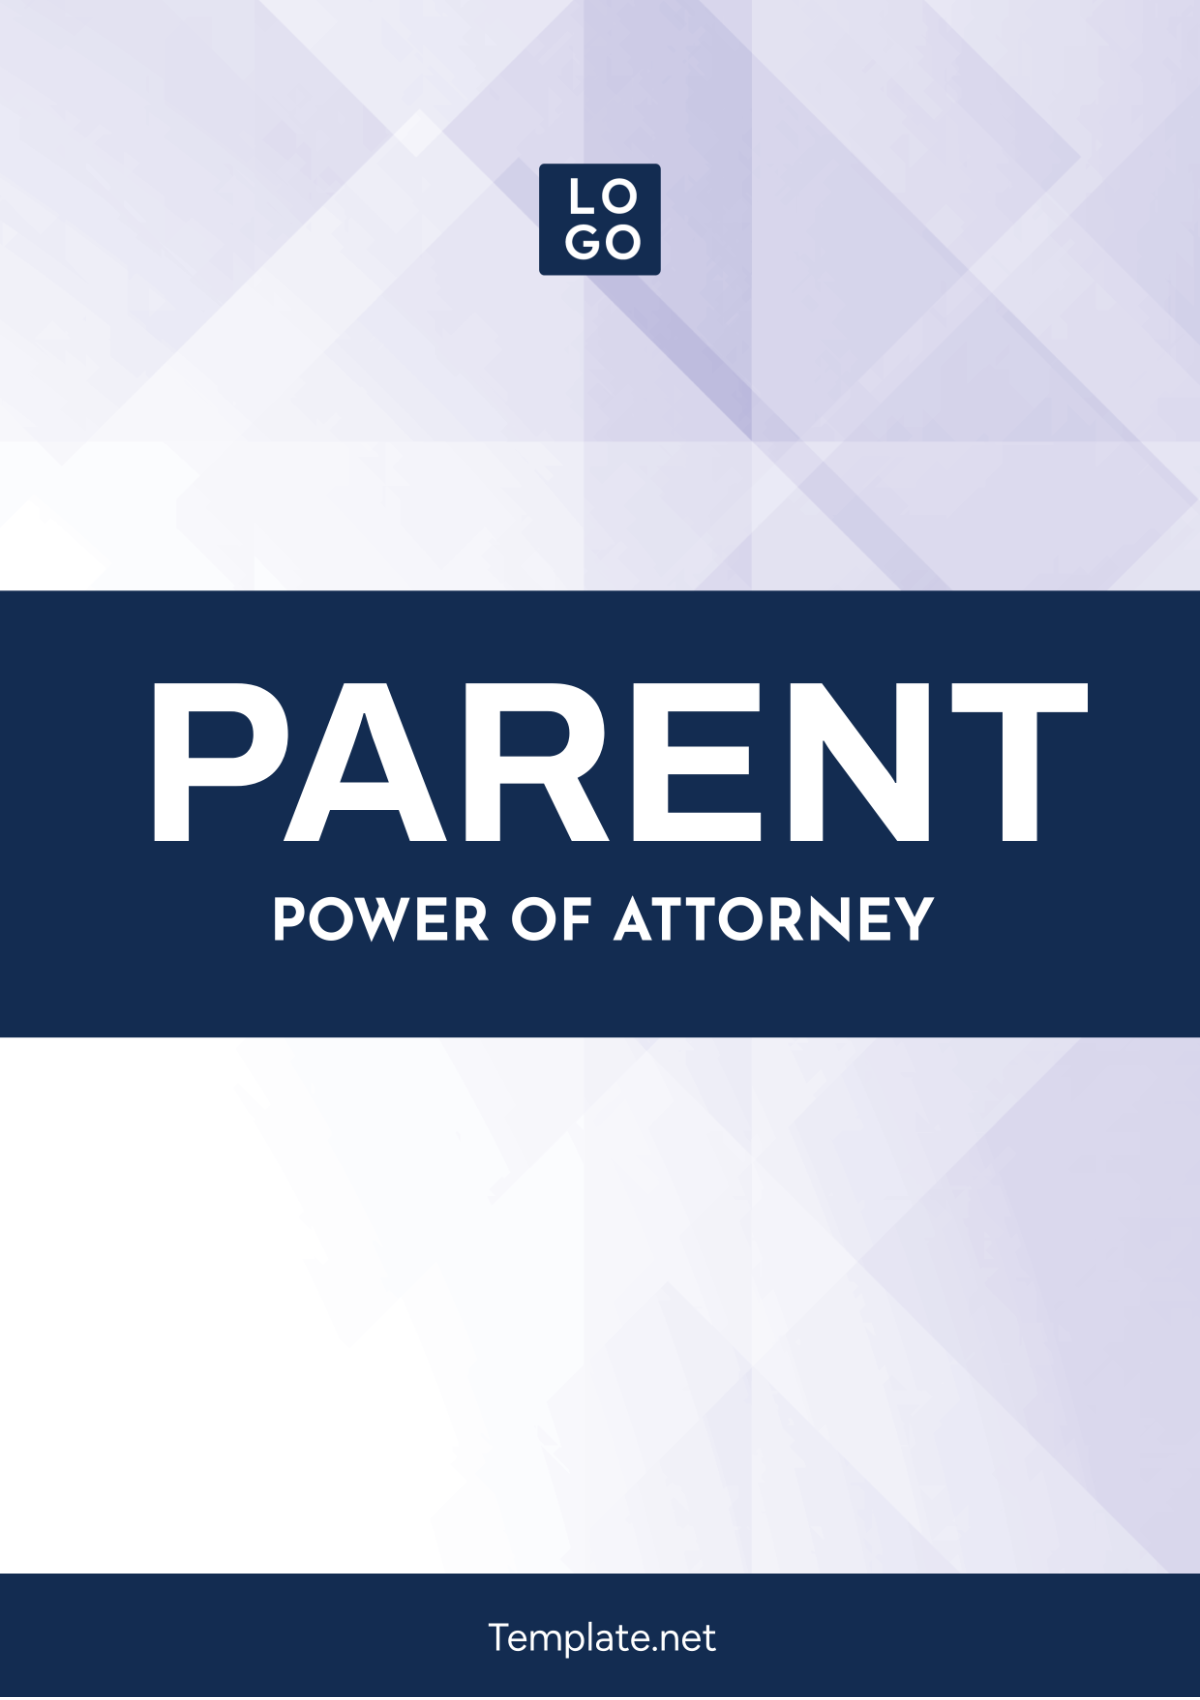 Parent Power of Attorney Template